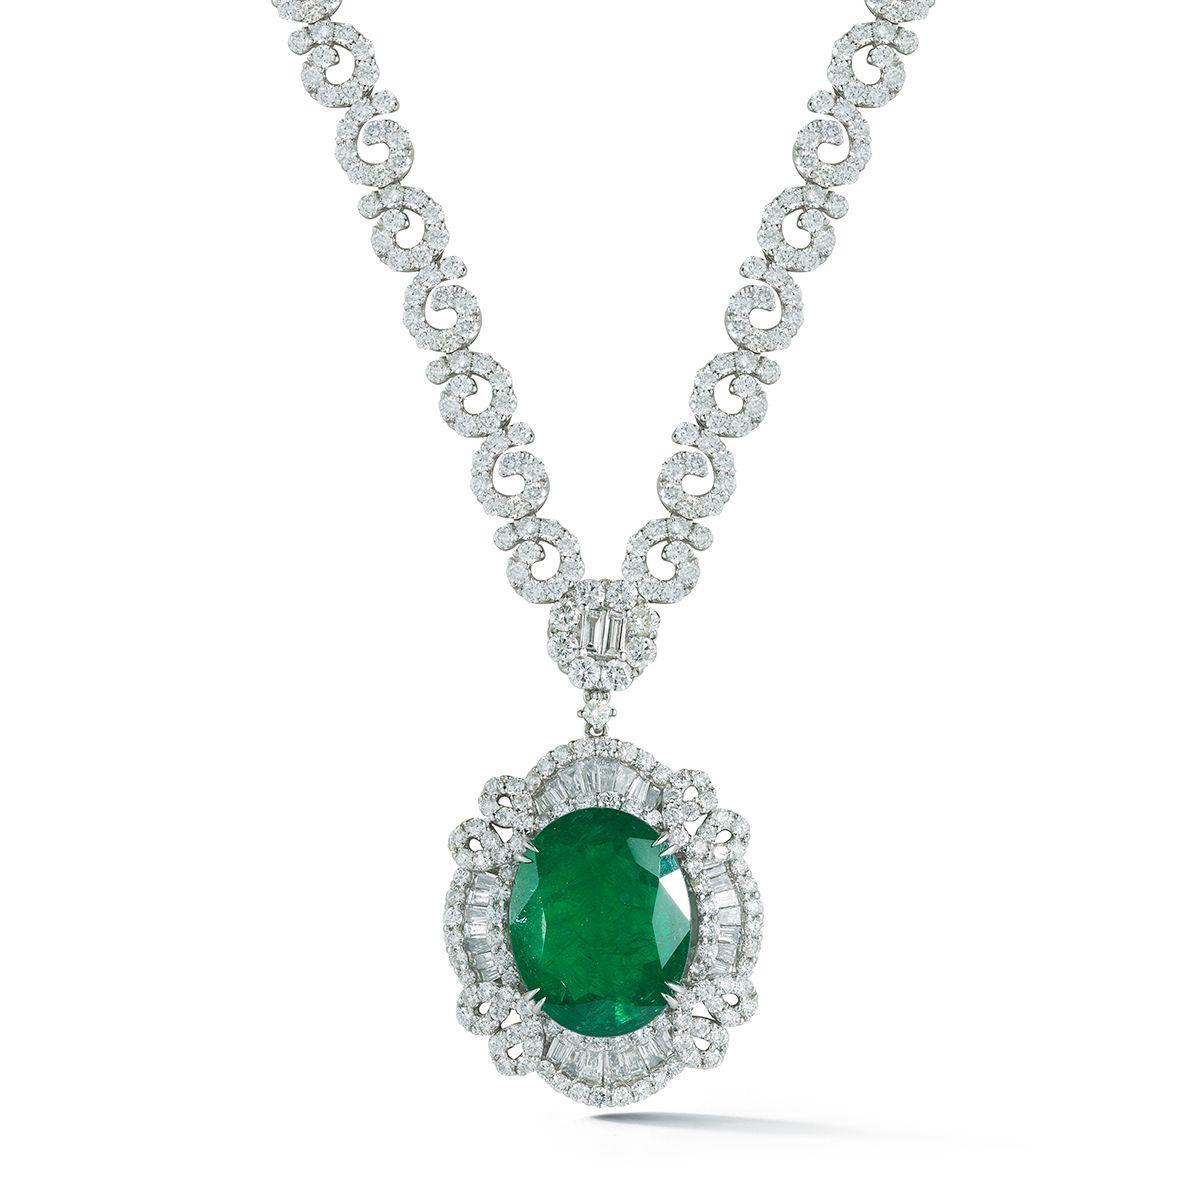 Modern 18k White Gold 8.91ct Emerald And 11.71ct Diamond Necklace For Sale